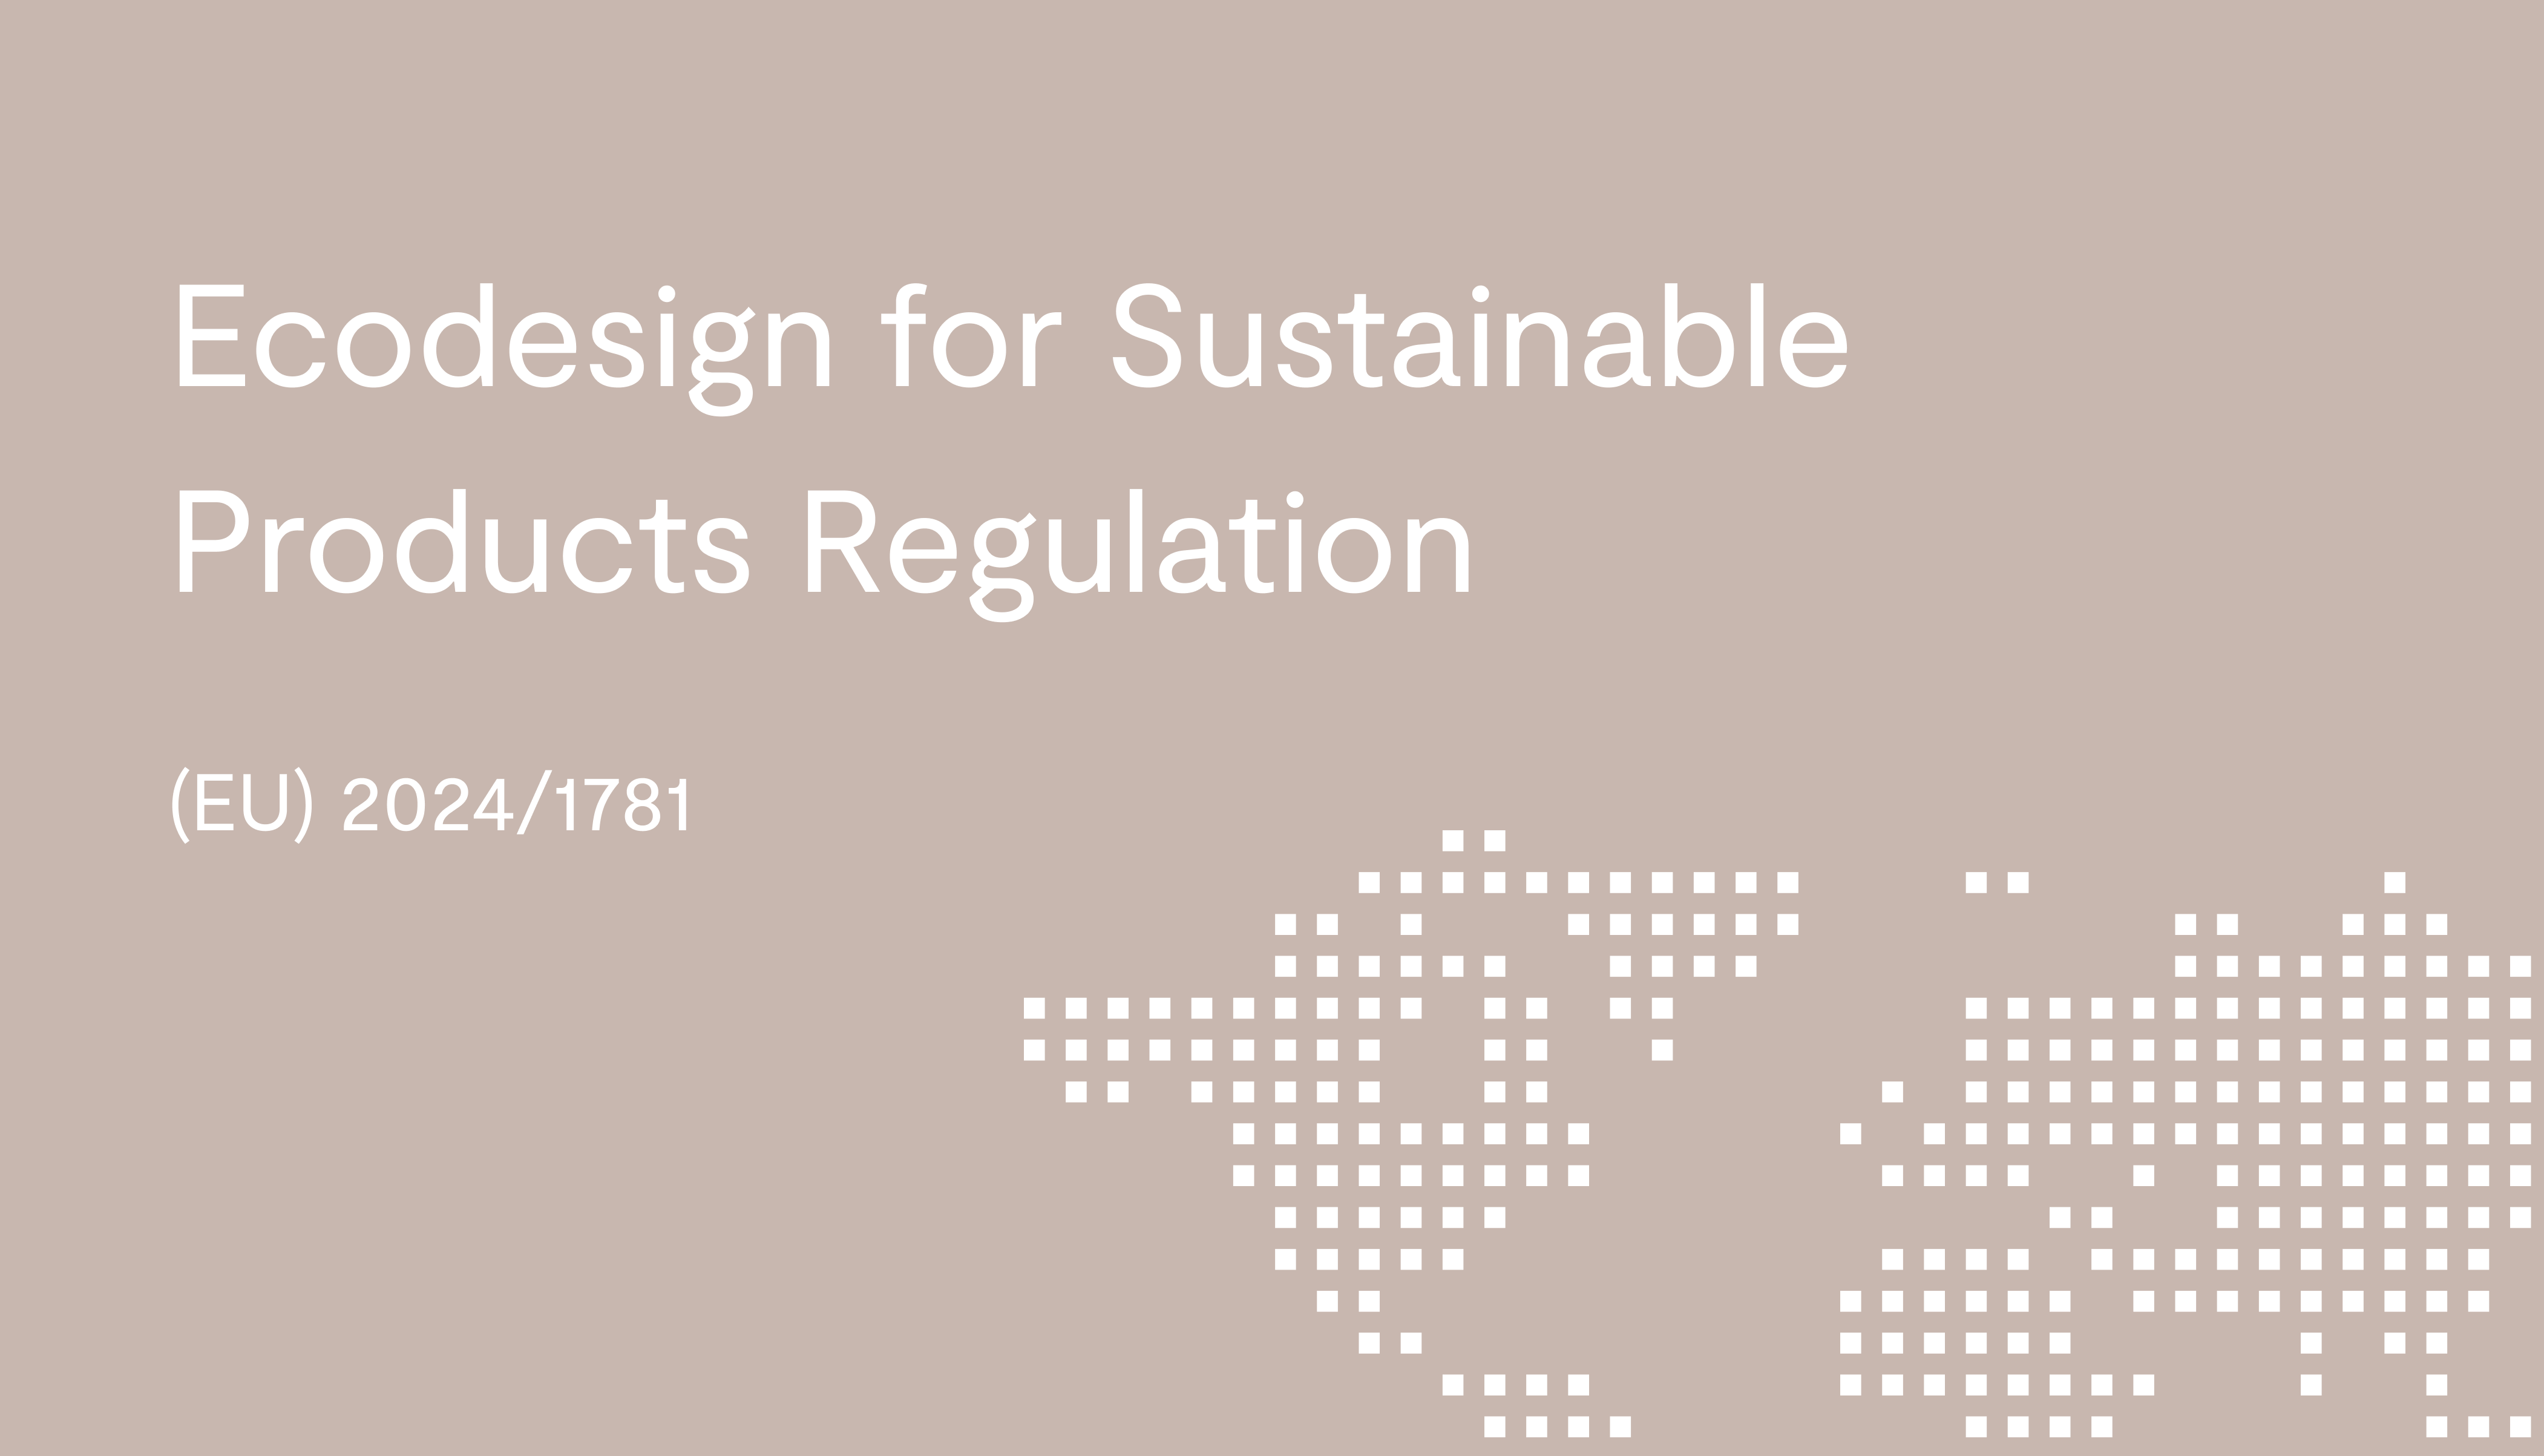 Ecodesign for Sustainable Products Regulation ((EU) 2024/1781)